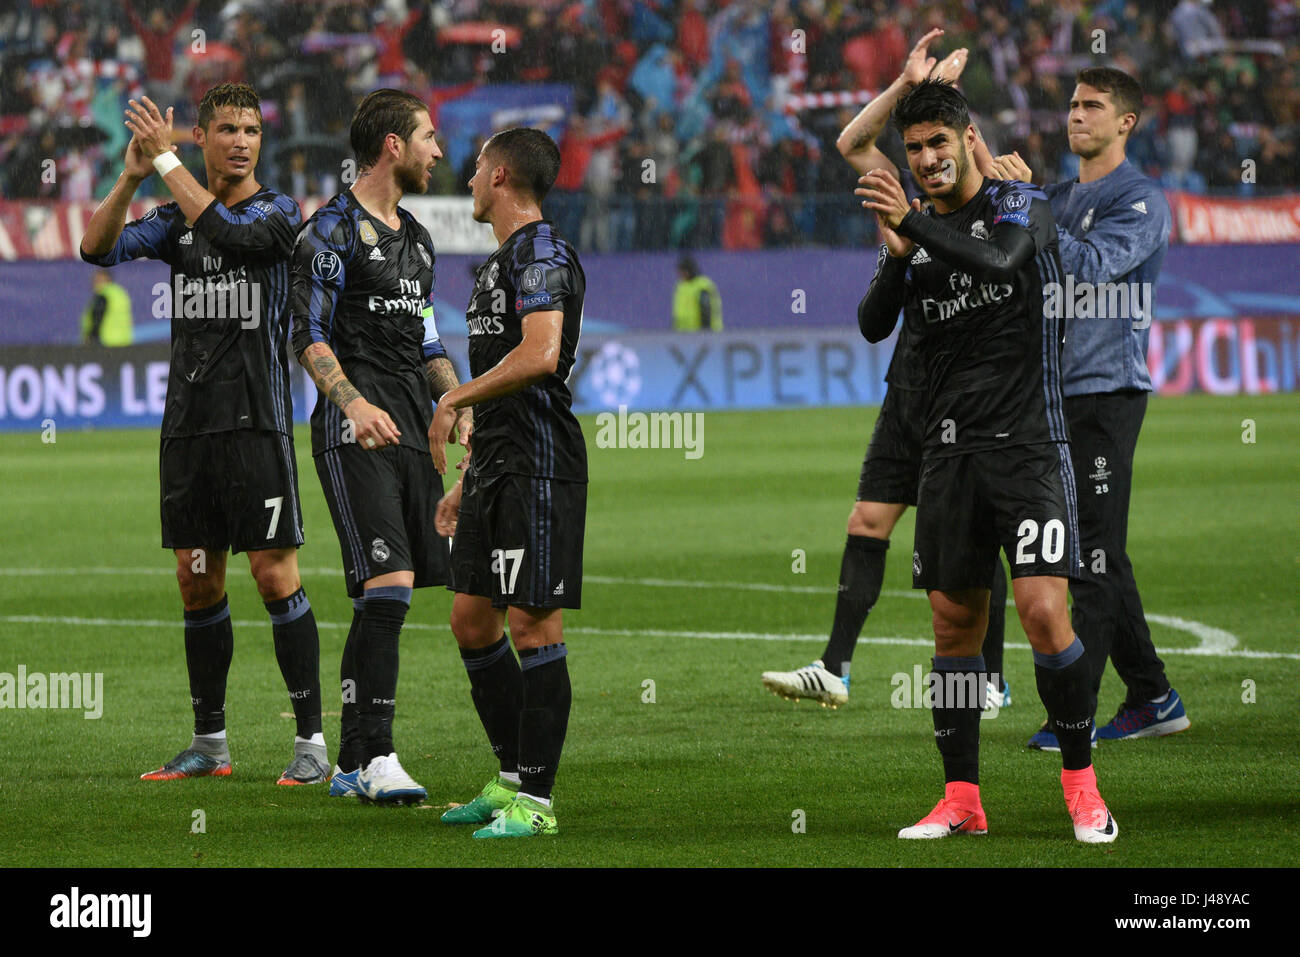 Madrid, Spain. 10th May, 2017. Cristiano Ronaldo (left), Sergio Ramos, Lucas Vazquez and Asensio of Real Madrid celebrate the victory following the UEFA Champions League Semi Final second leg match between Club Atletico de Madrid and Real Madrid CF at Vicente Calderon Stadium. Credit: Jorge Sanz/Pacific Press/Alamy Live News Stock Photo